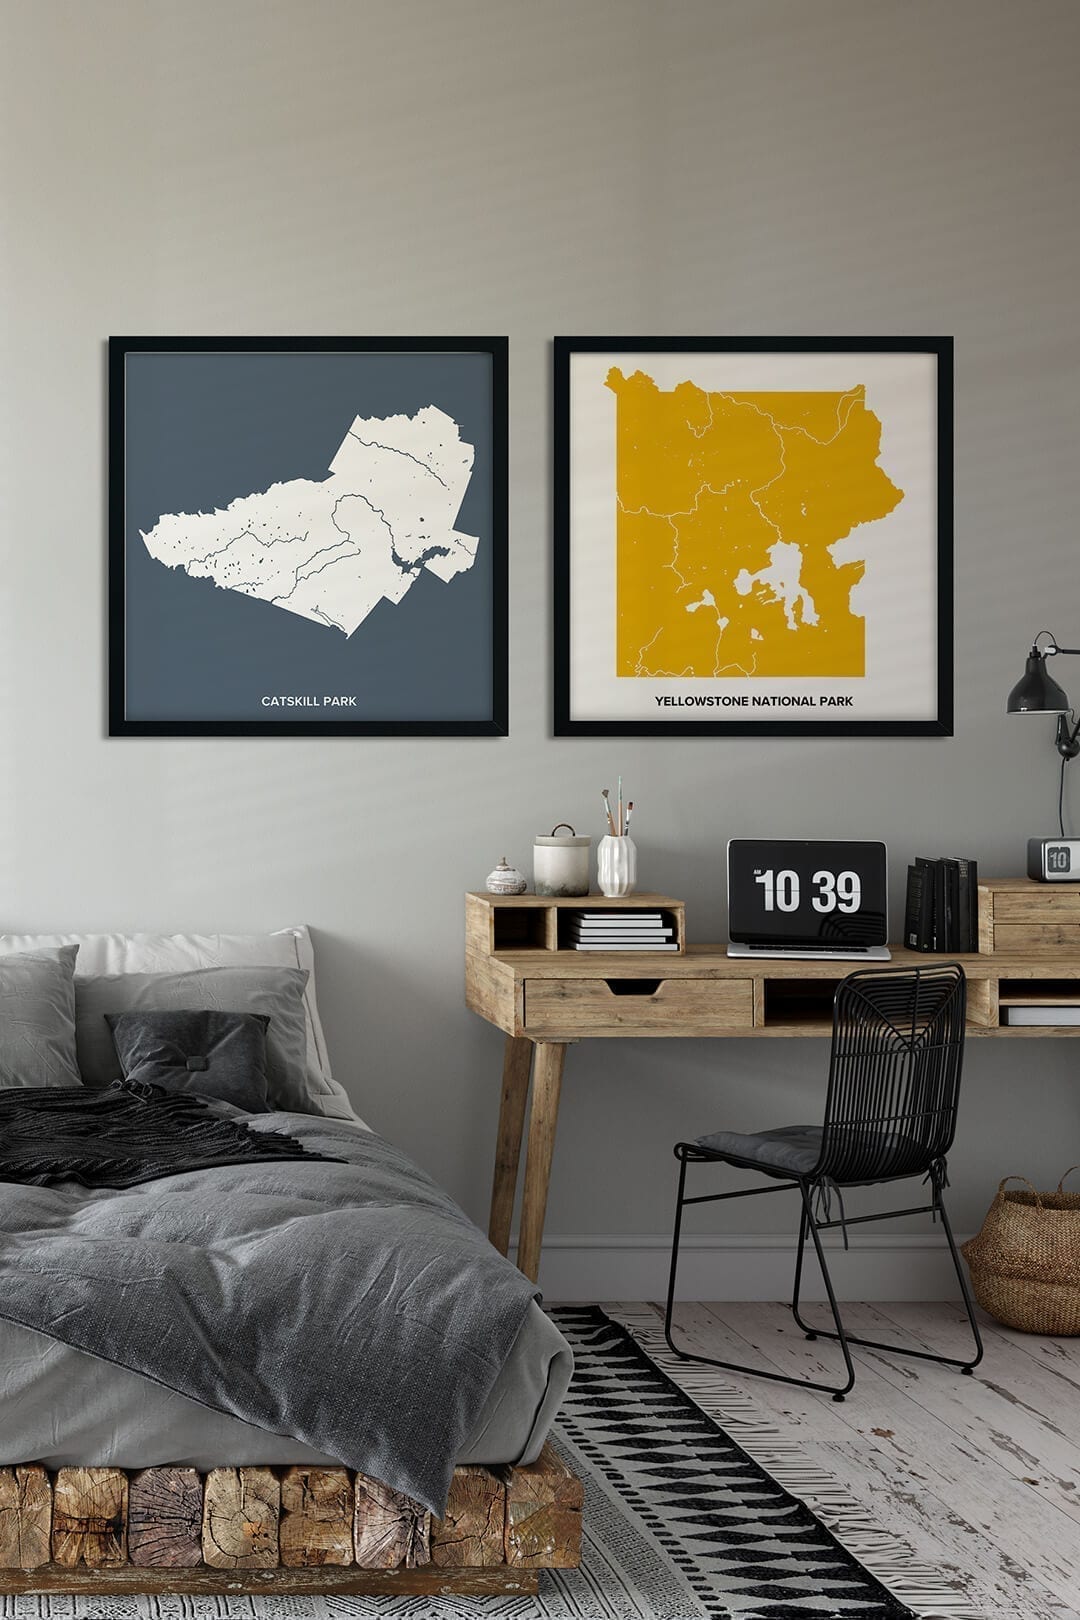 National Parks Maps in square shape and black frames decorating grey painted wall